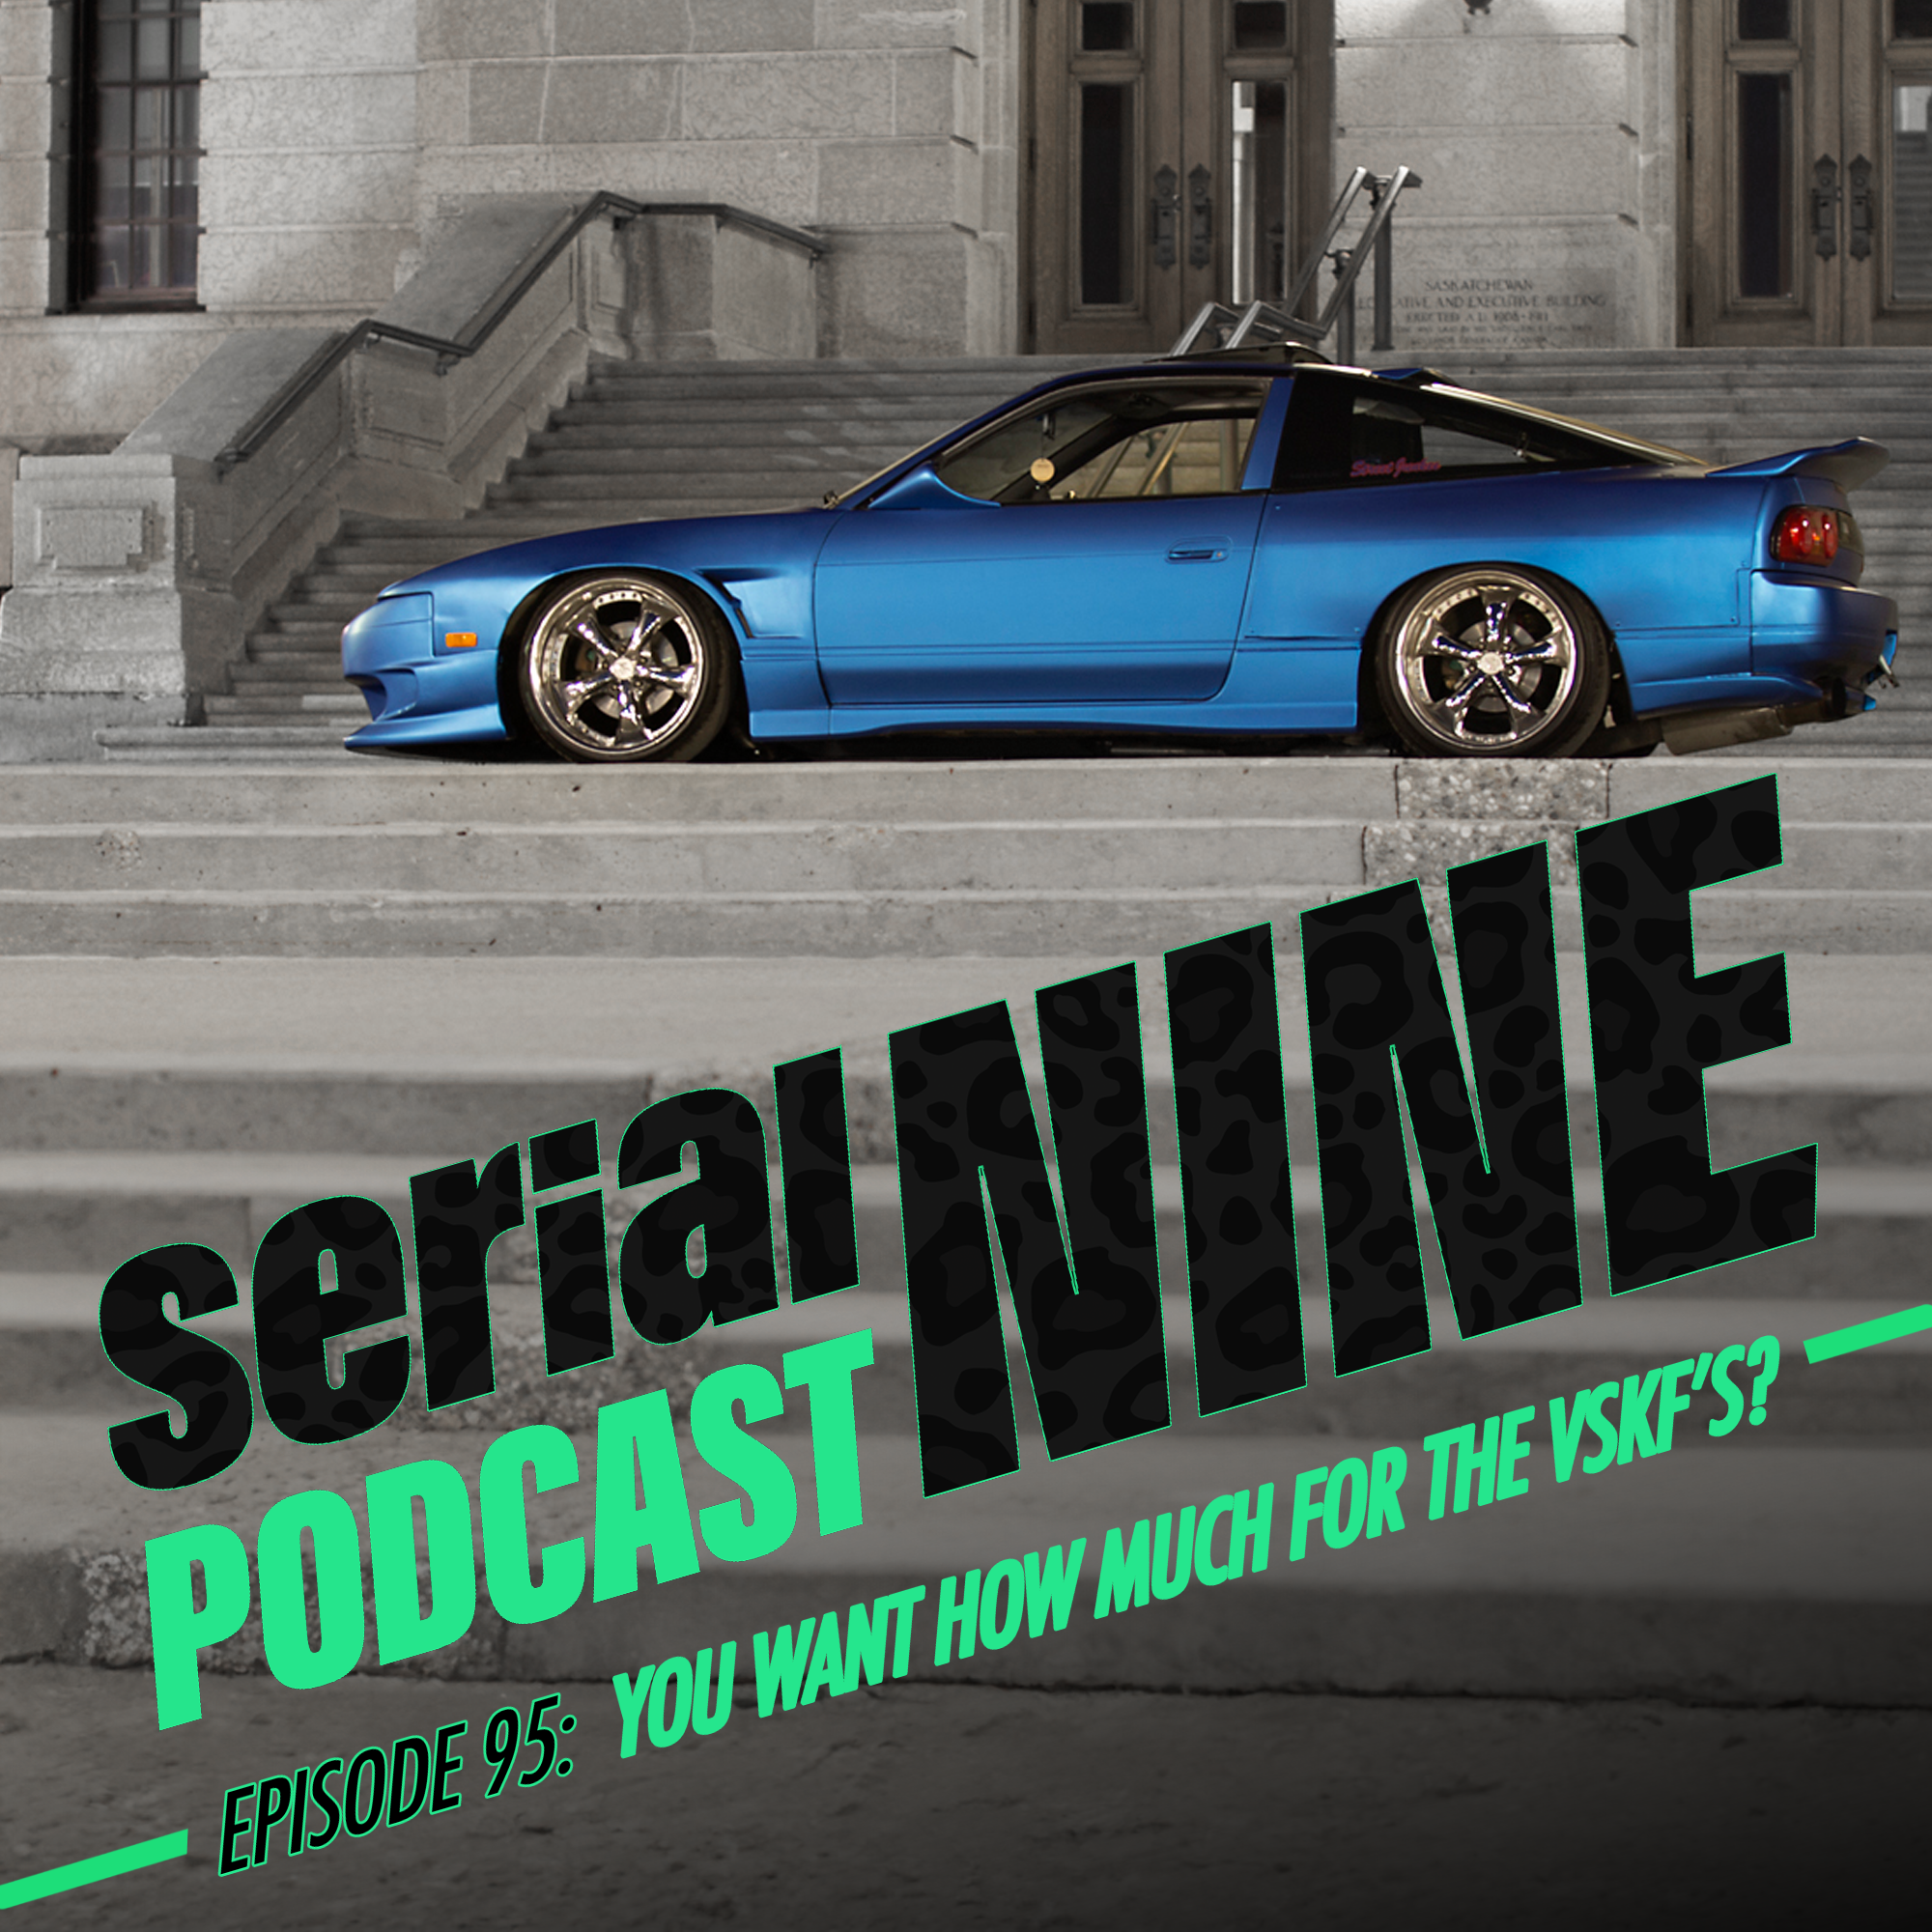 SerialPodcastNine Episode 95:  You want HOW MUCH for the  VSKF’S?